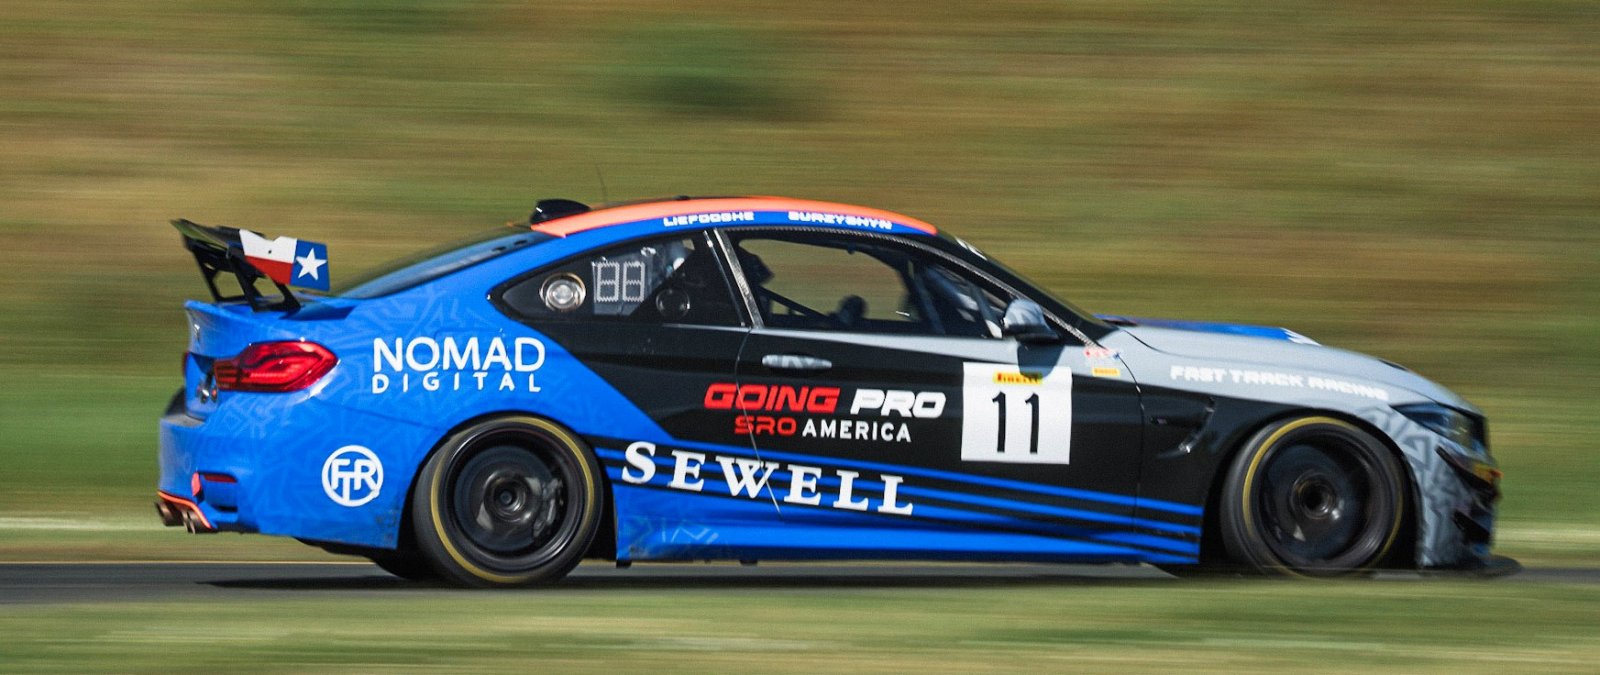 Past Champions Lead Fast Track Racing BMW M4 Sports Car Team This Weekend at Sonoma Raceway in SRO Pirelli GT4 America Series 